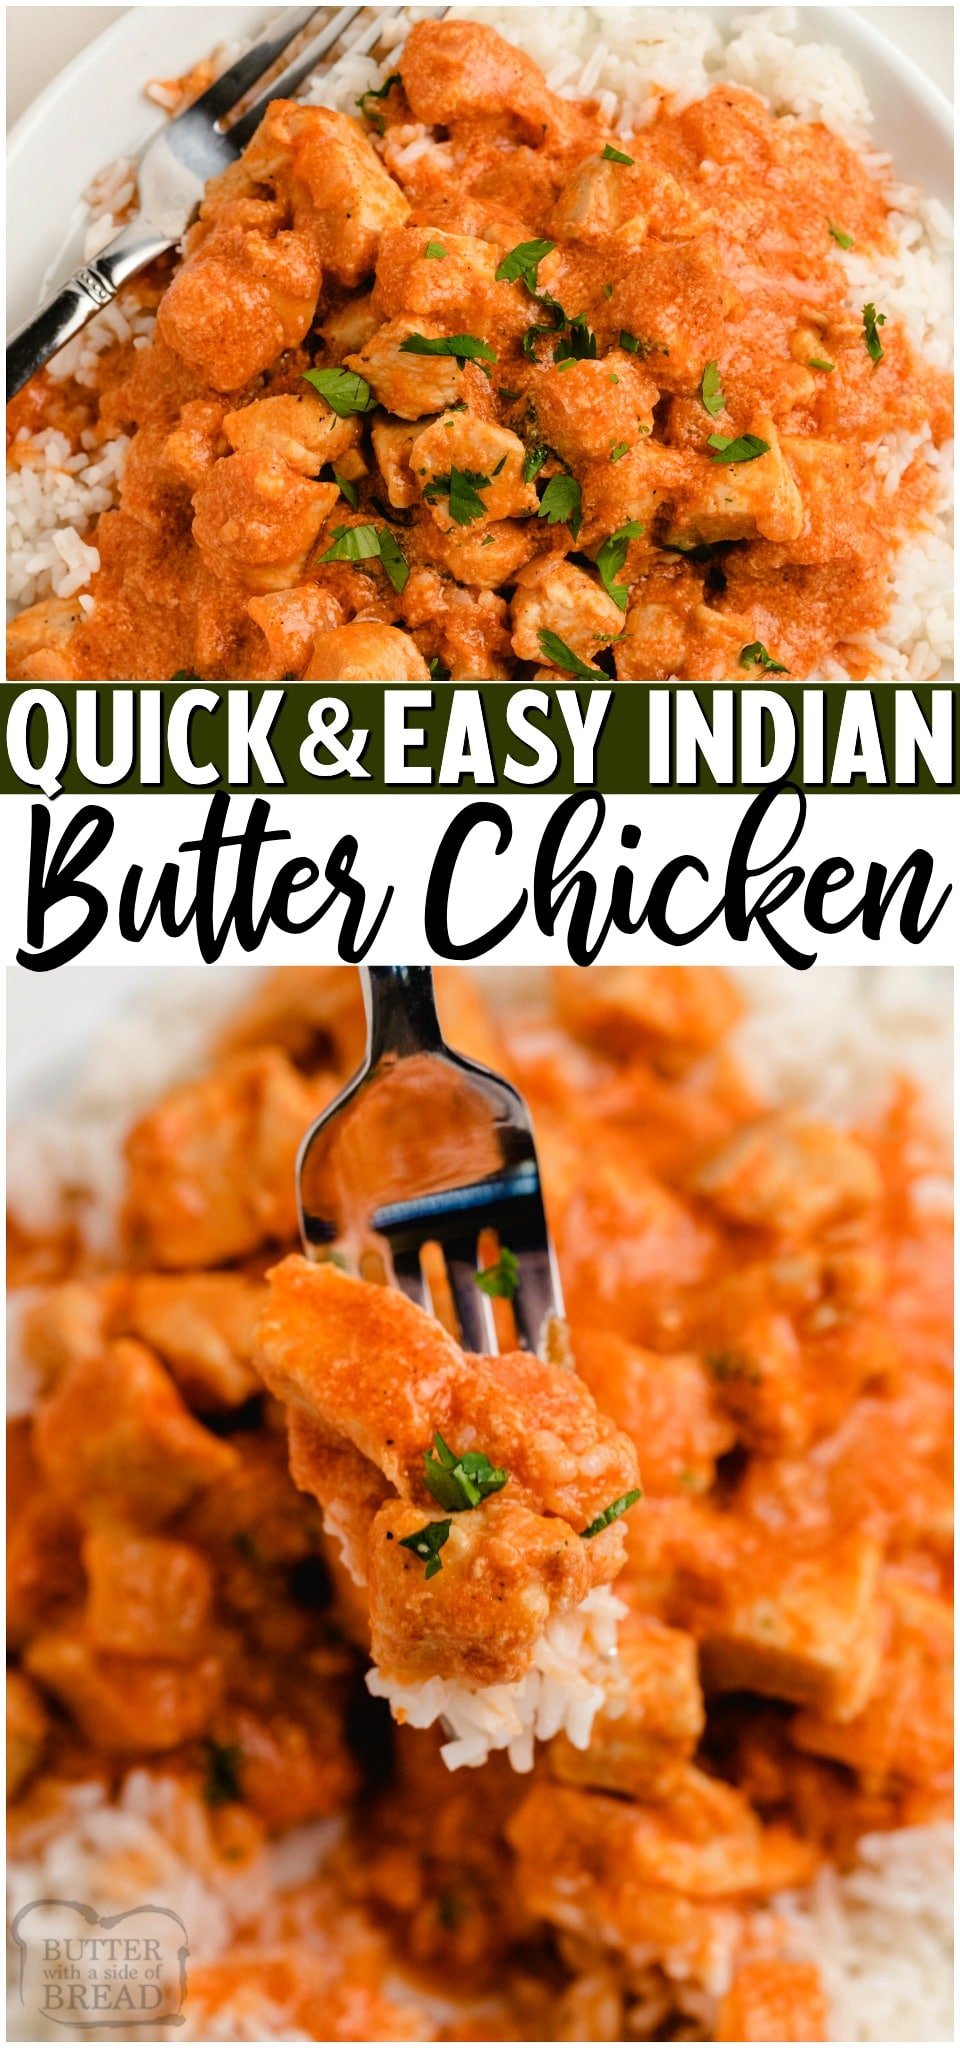 Easy Indian Butter chicken recipe made with a simple blend of spices, onion, garlic, tender chicken, tomato sauce & butter, of course! Serve this flavorful Butter chicken over rice with a side of naan!